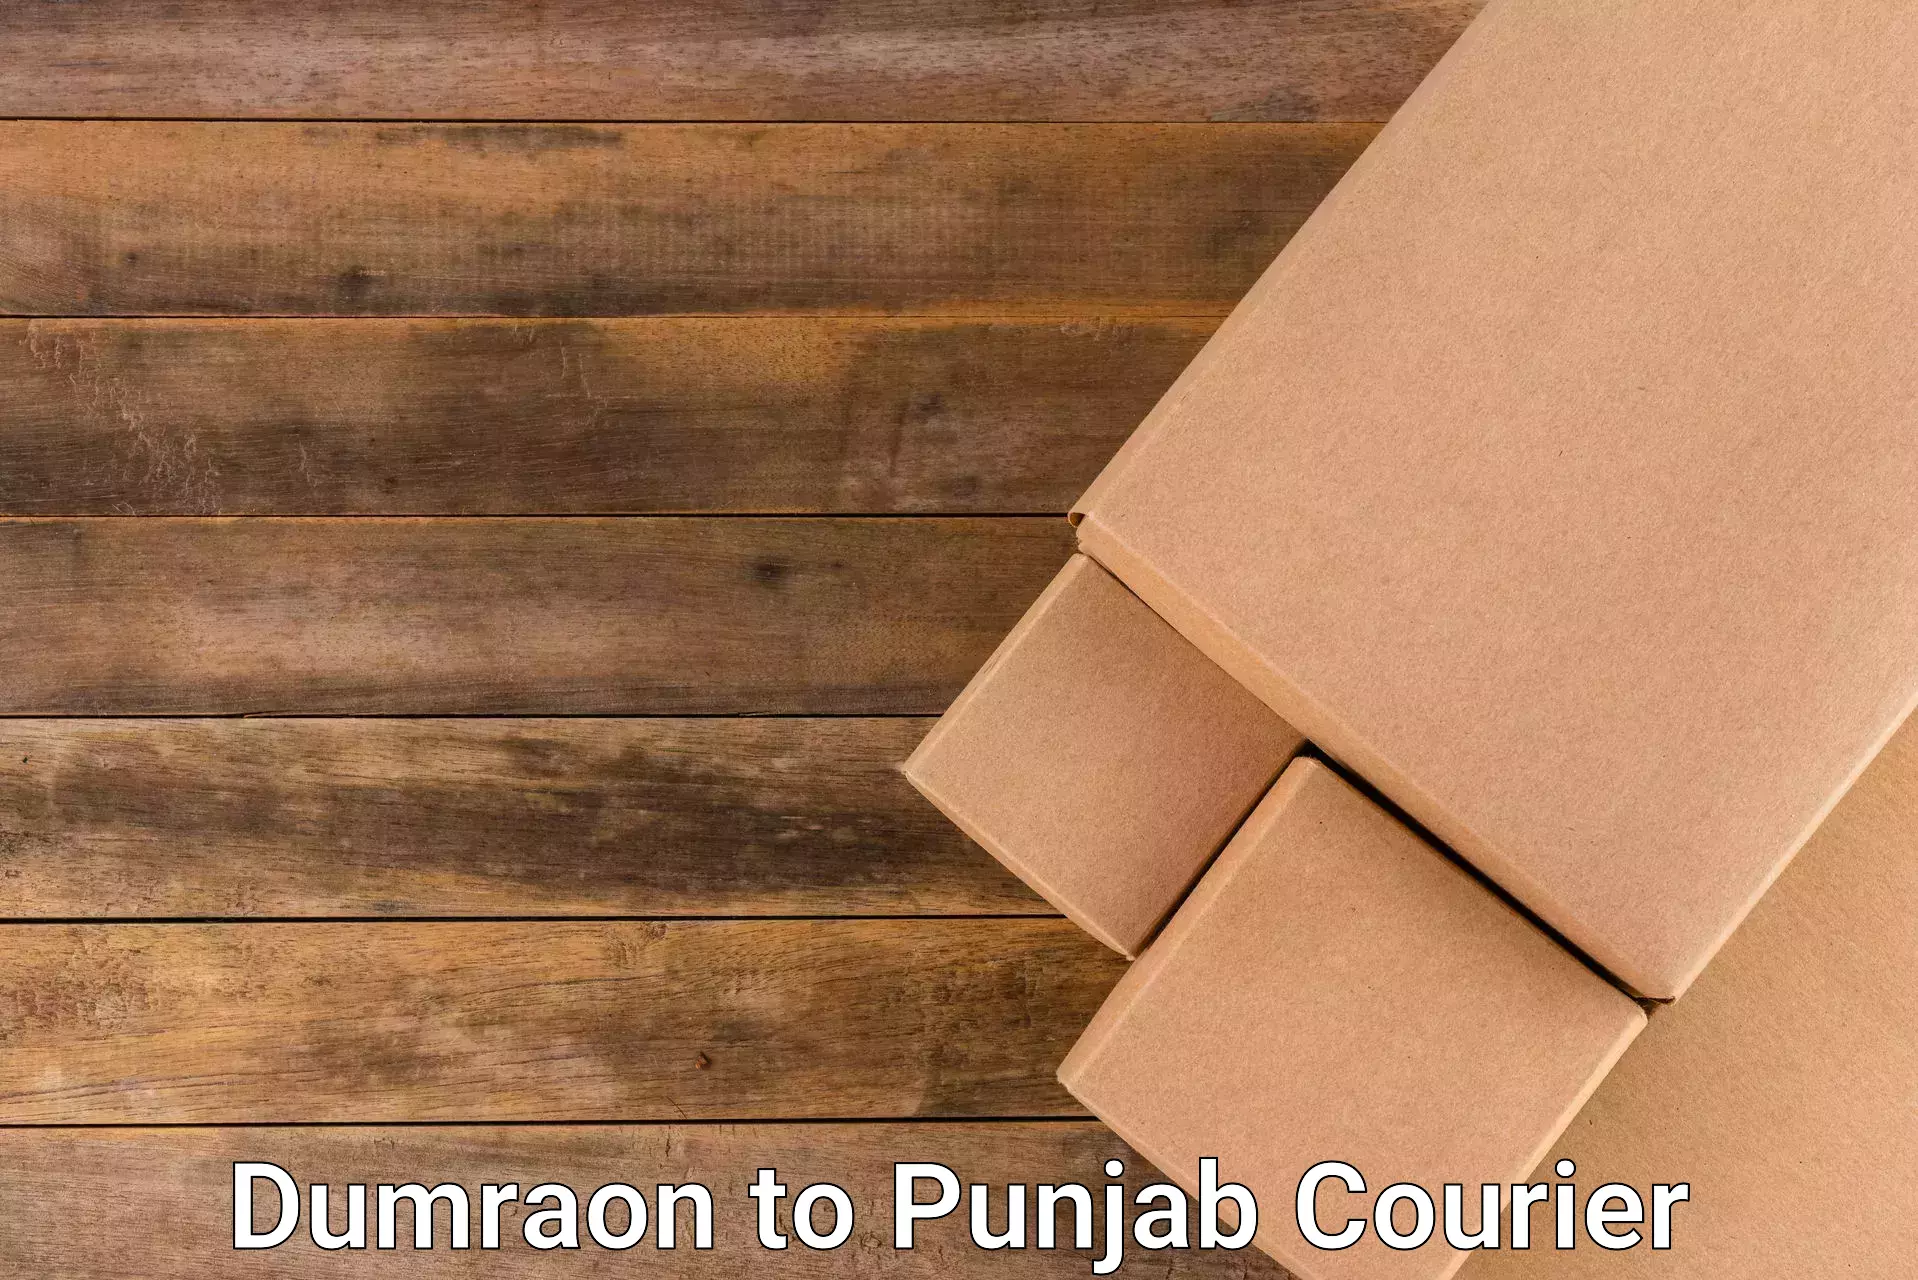 Multi-service courier options in Dumraon to Punjab